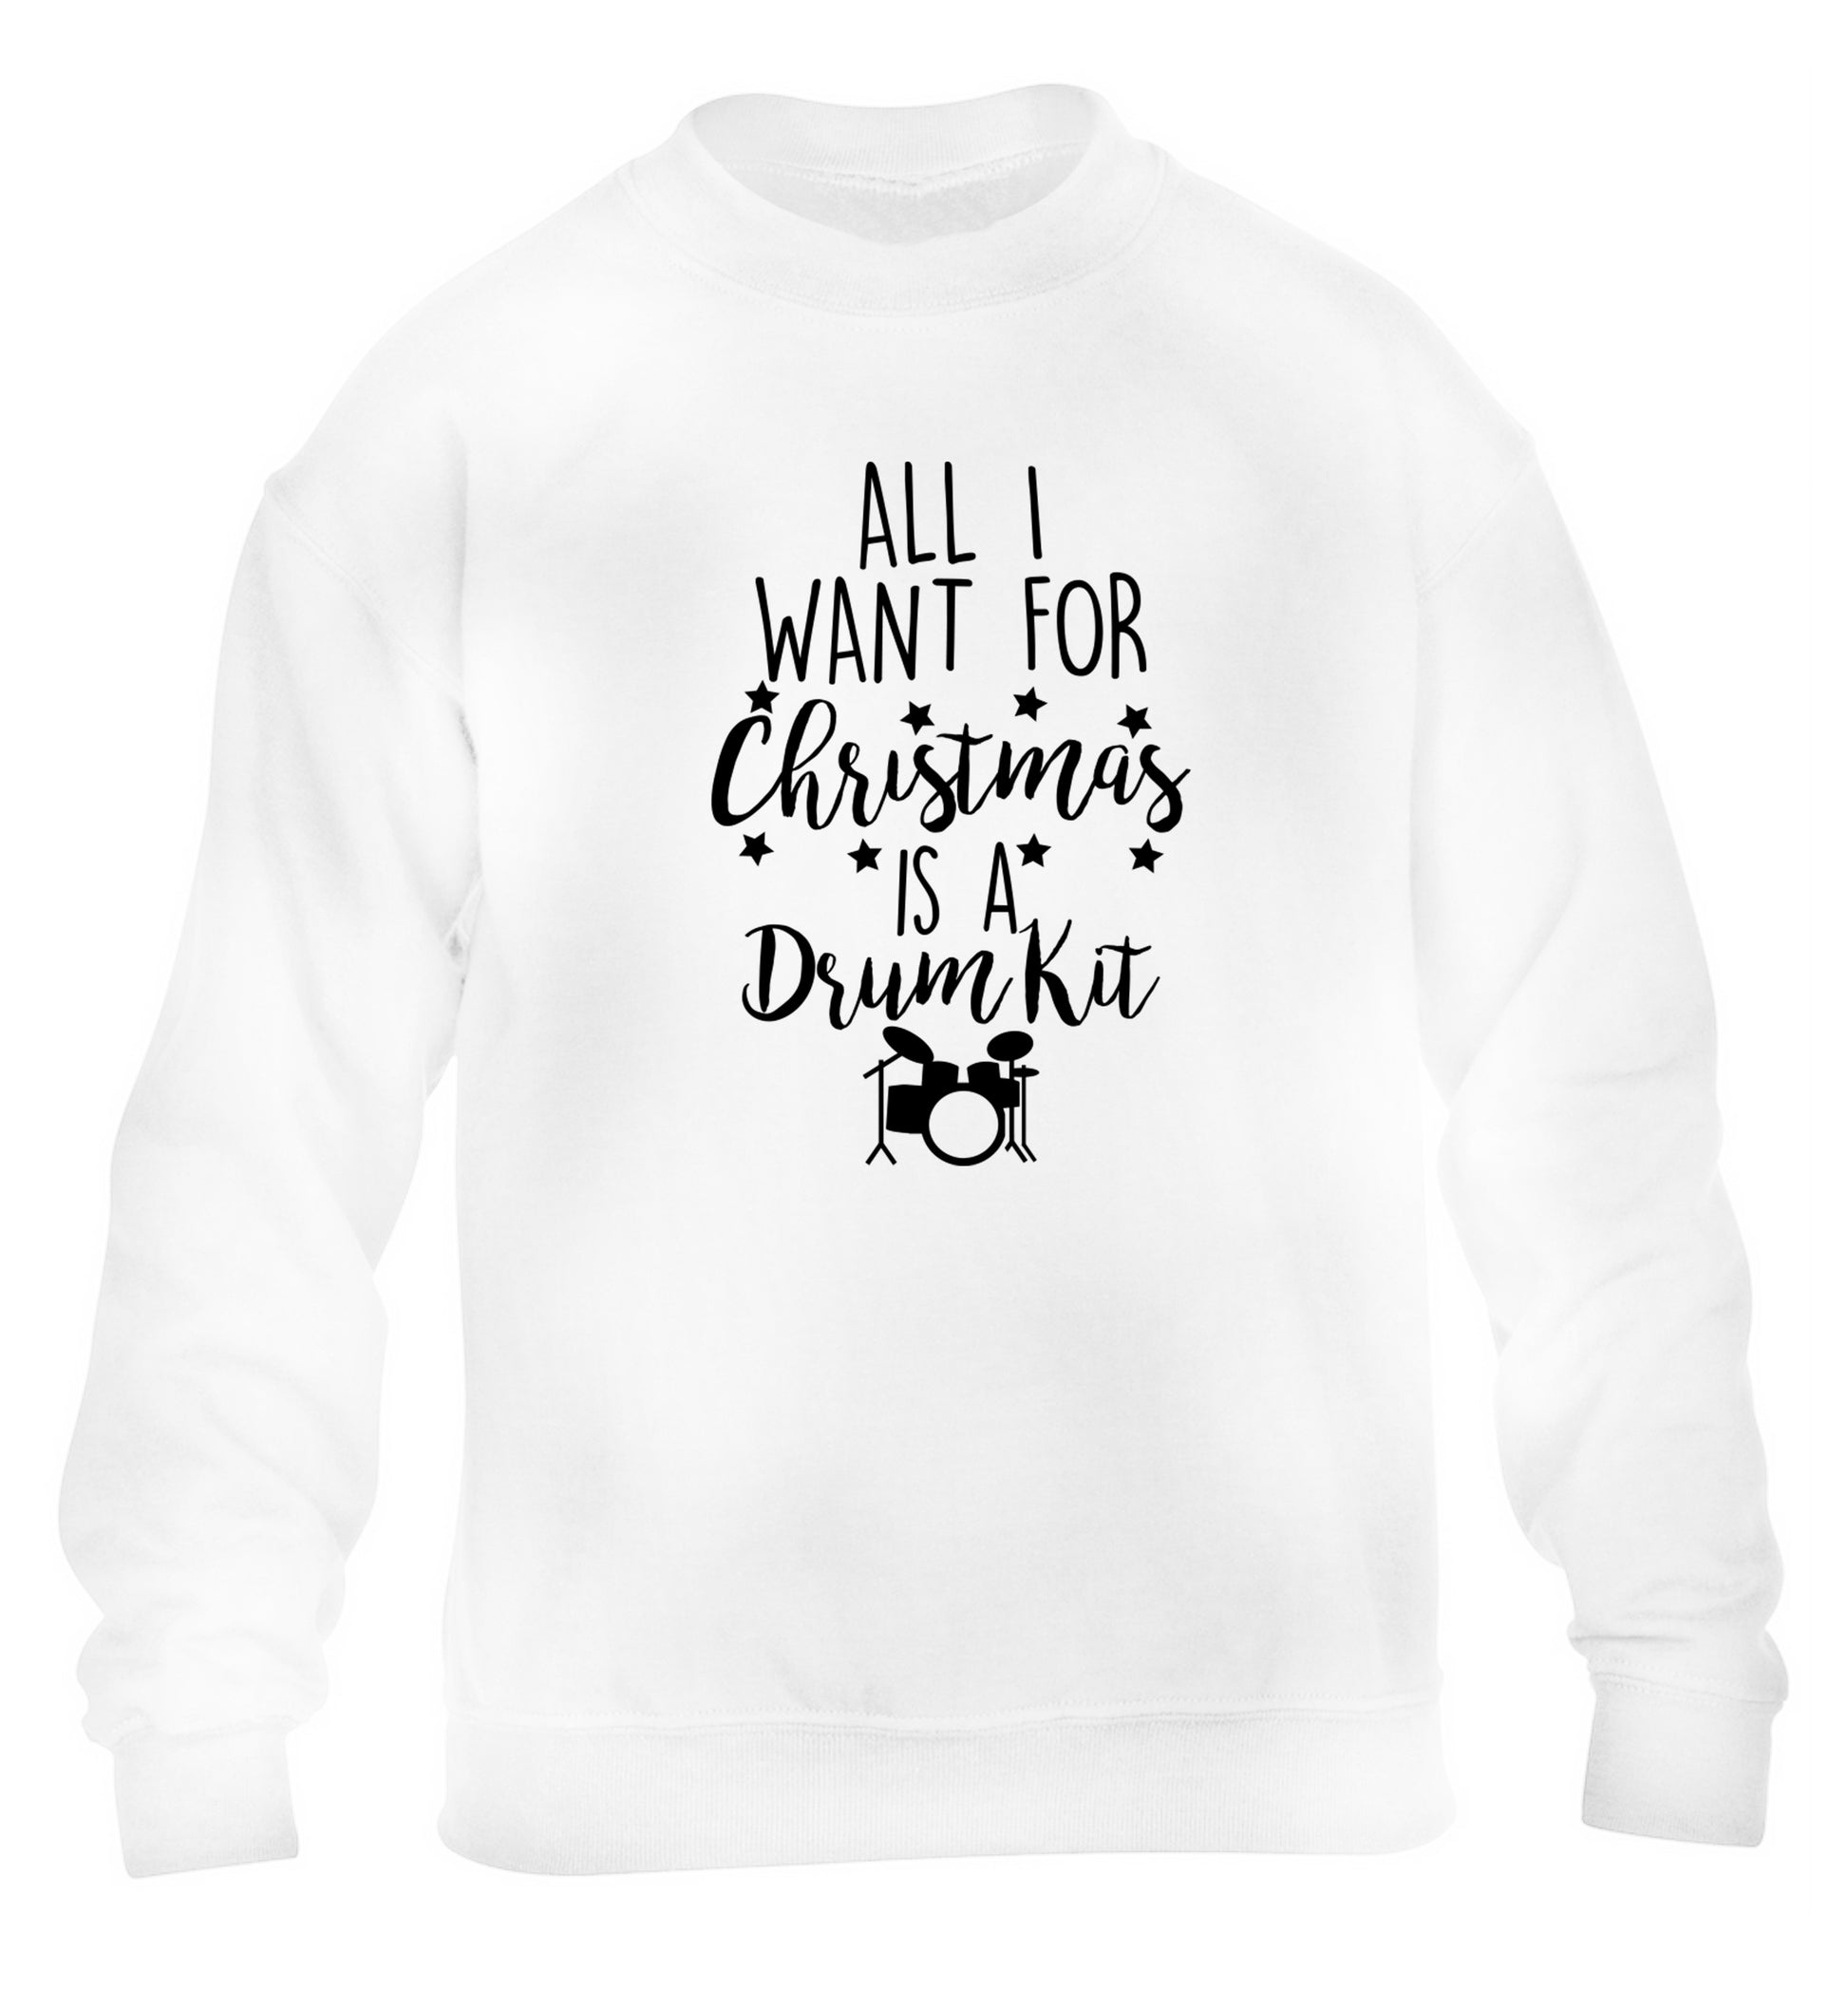 All I want for Christmas is a drum kit! children's white sweater 12-14 Years